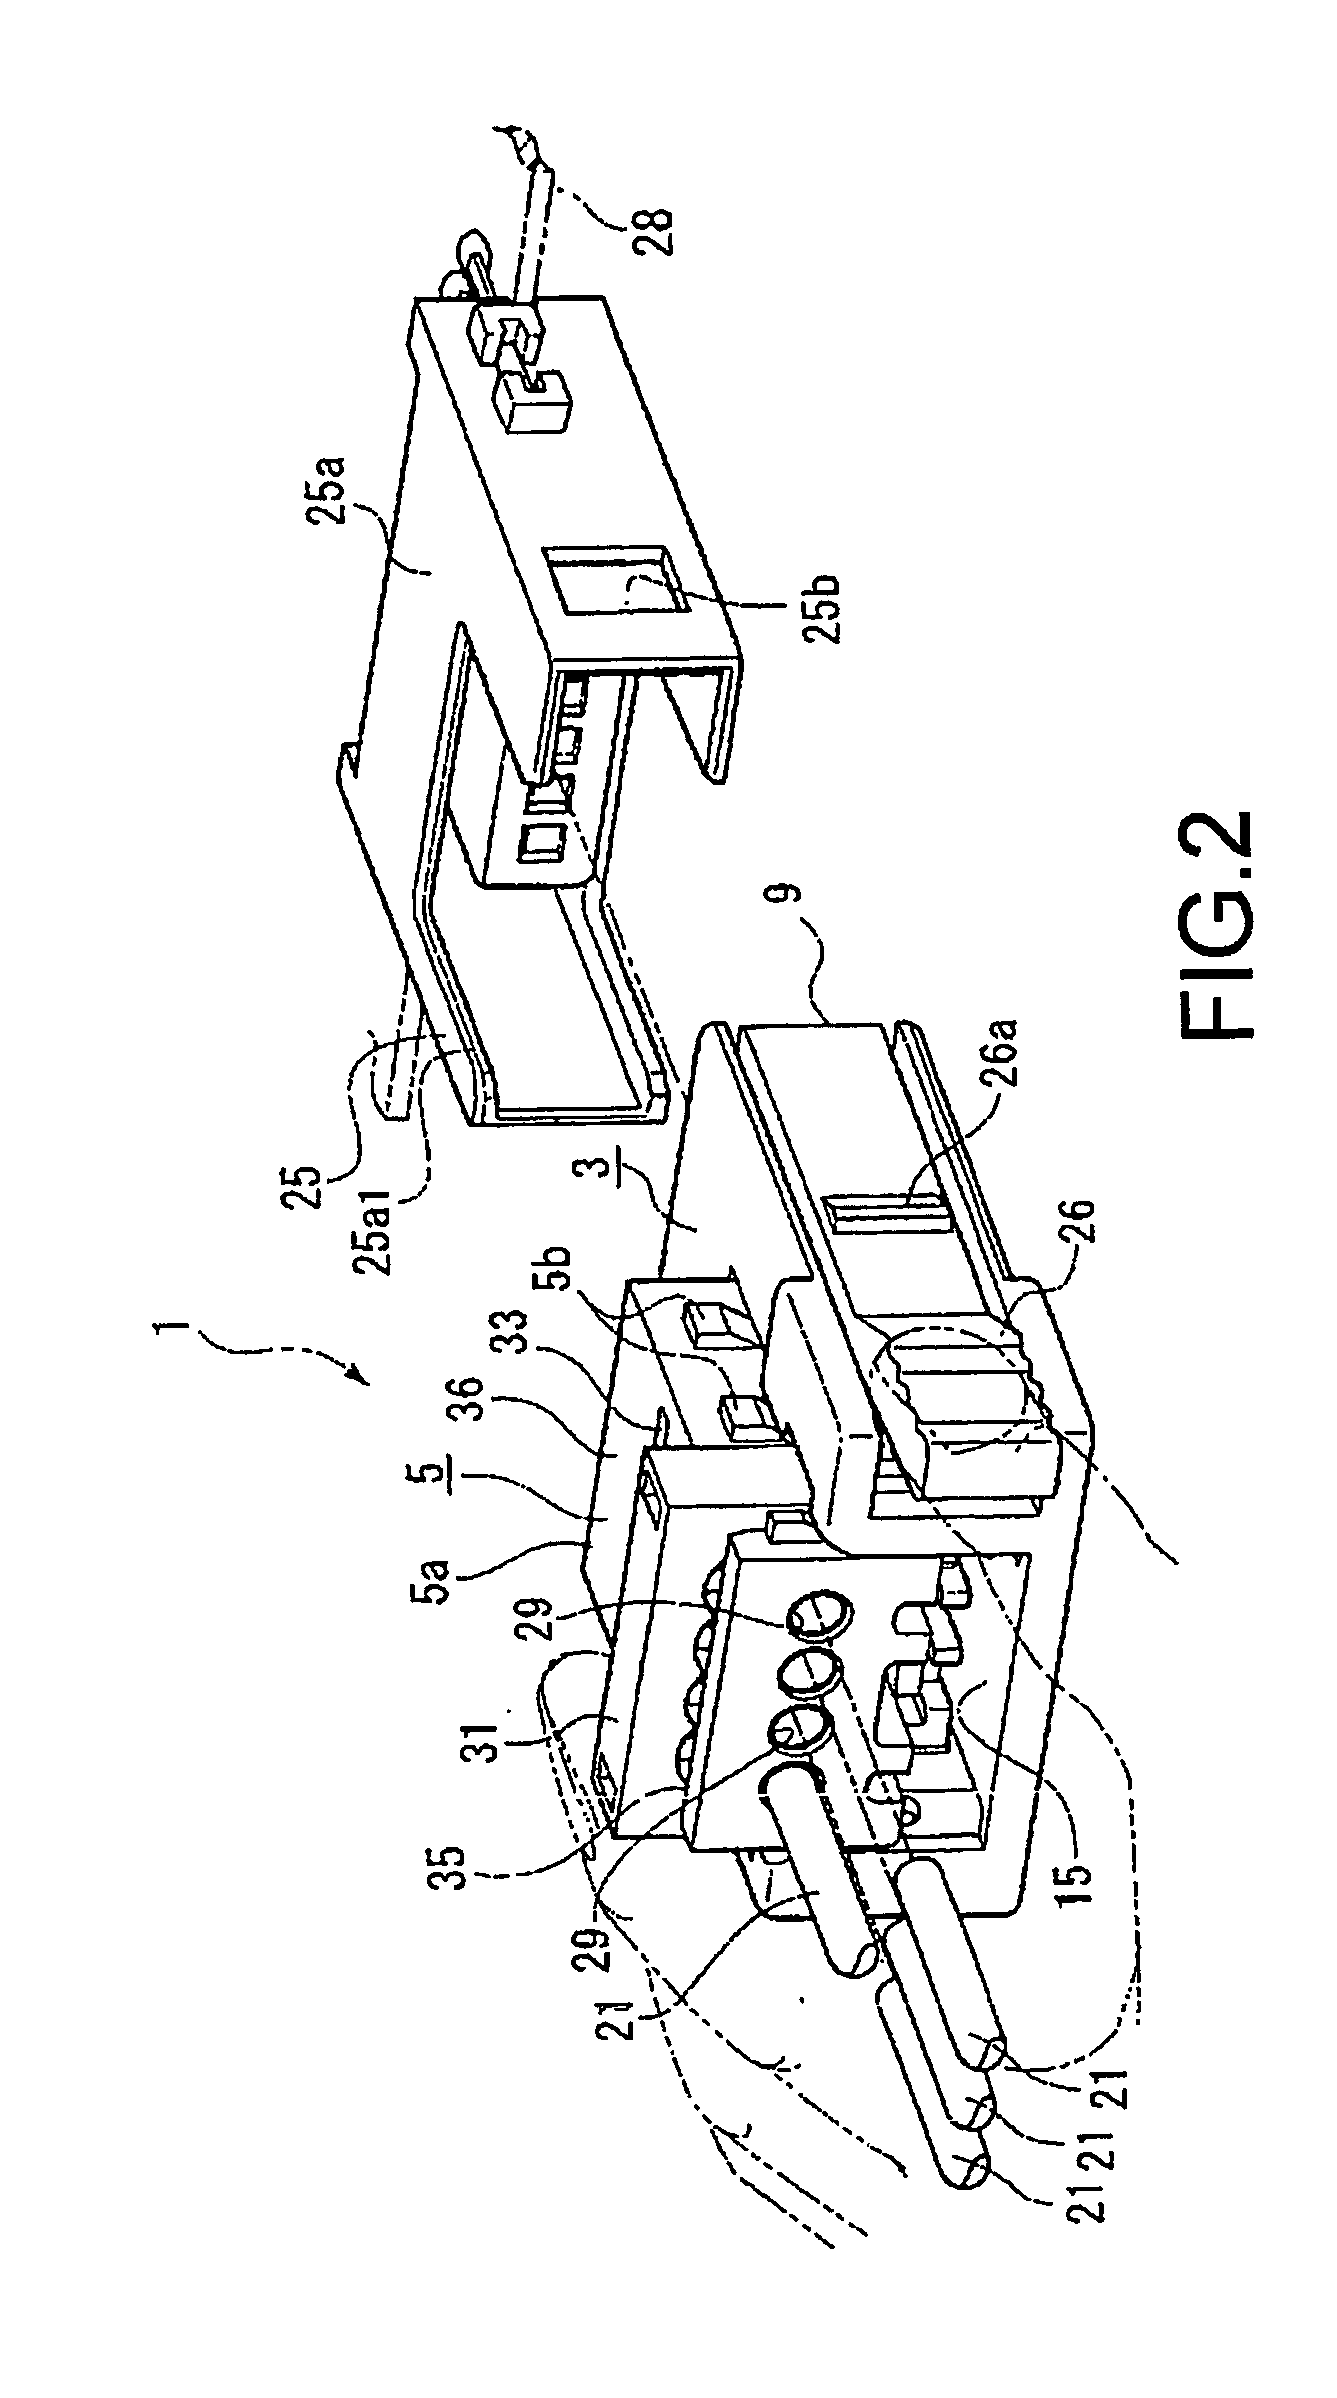 Insulation displacement connector